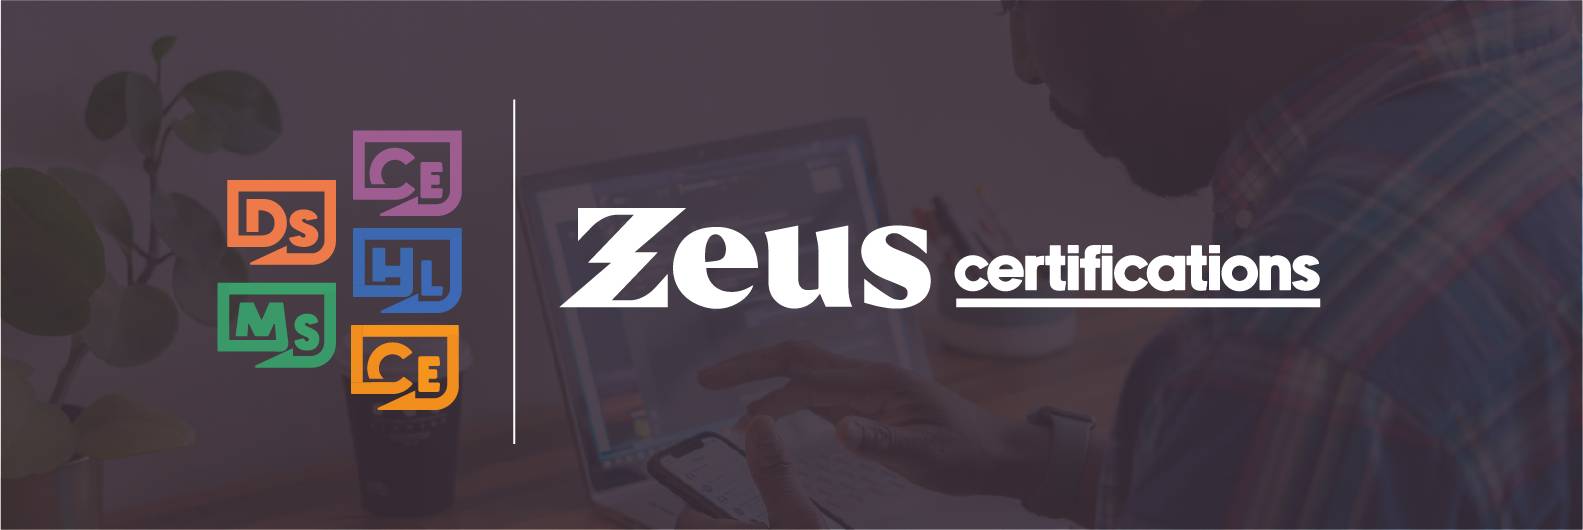 Multiple course icons next to the Zeus logo on a dark background